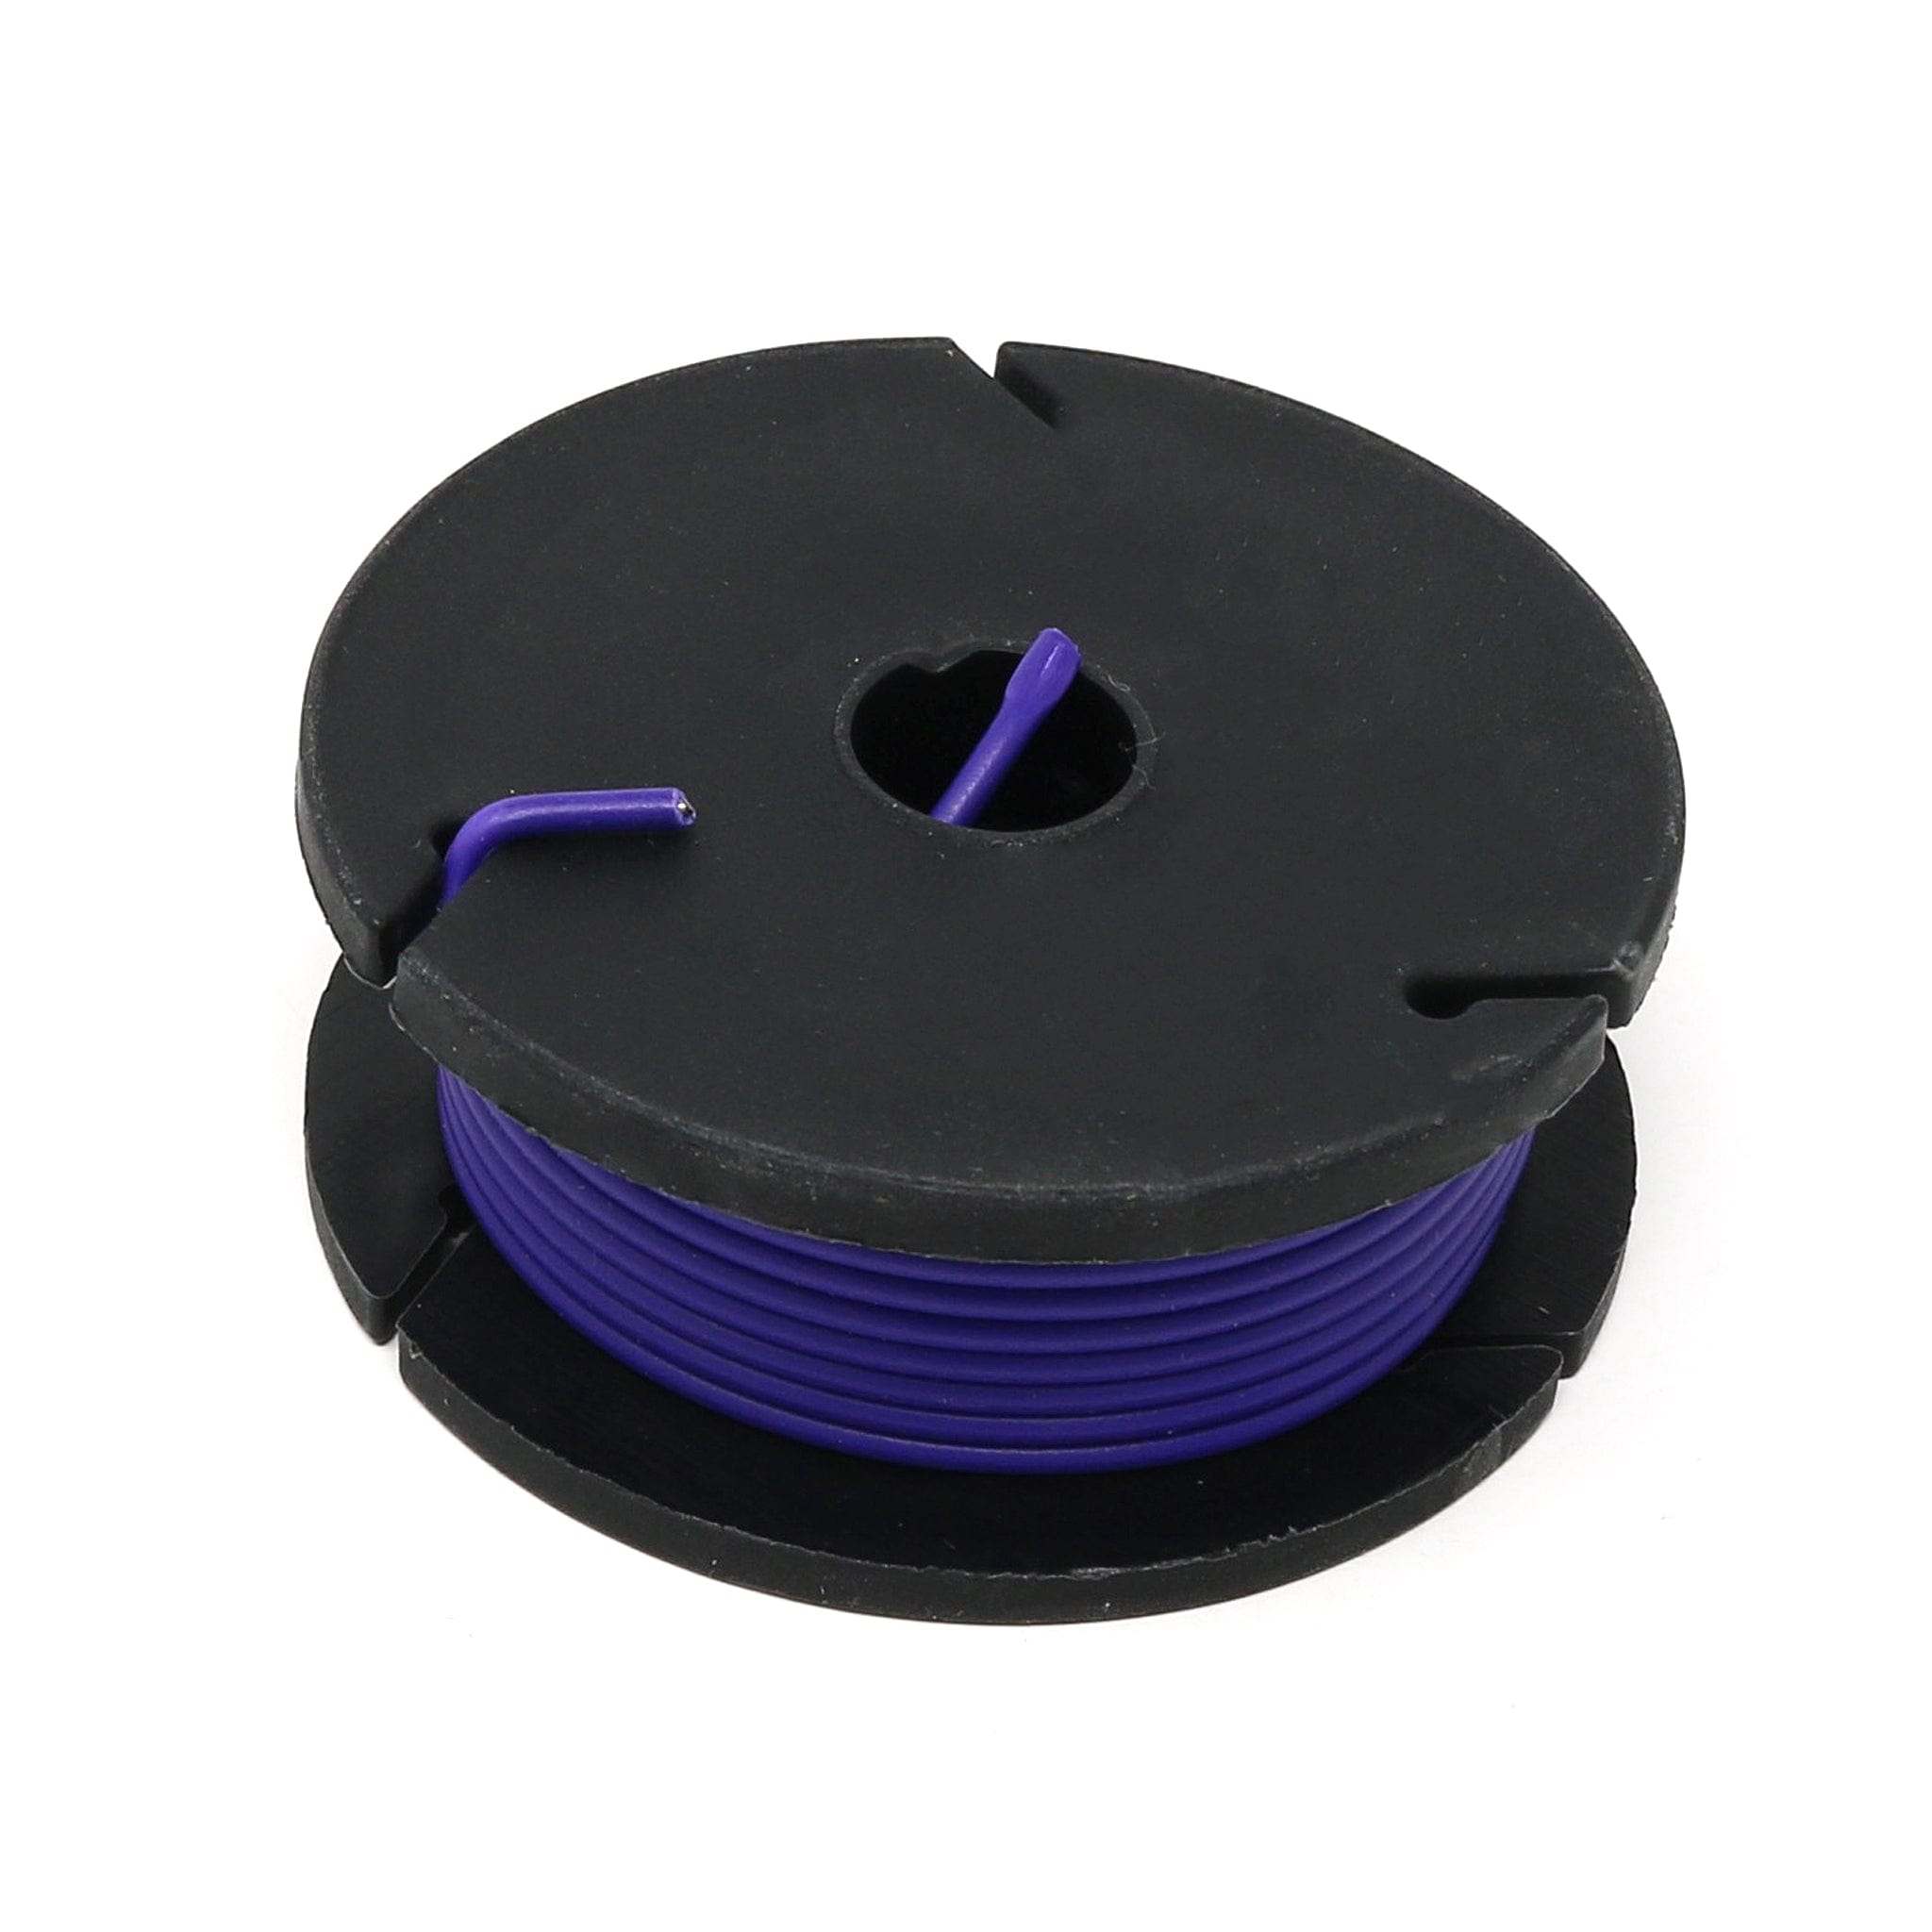 Stranded-Core Wire Spool - 25ft - 22AWG - Violet - The Pi Hut